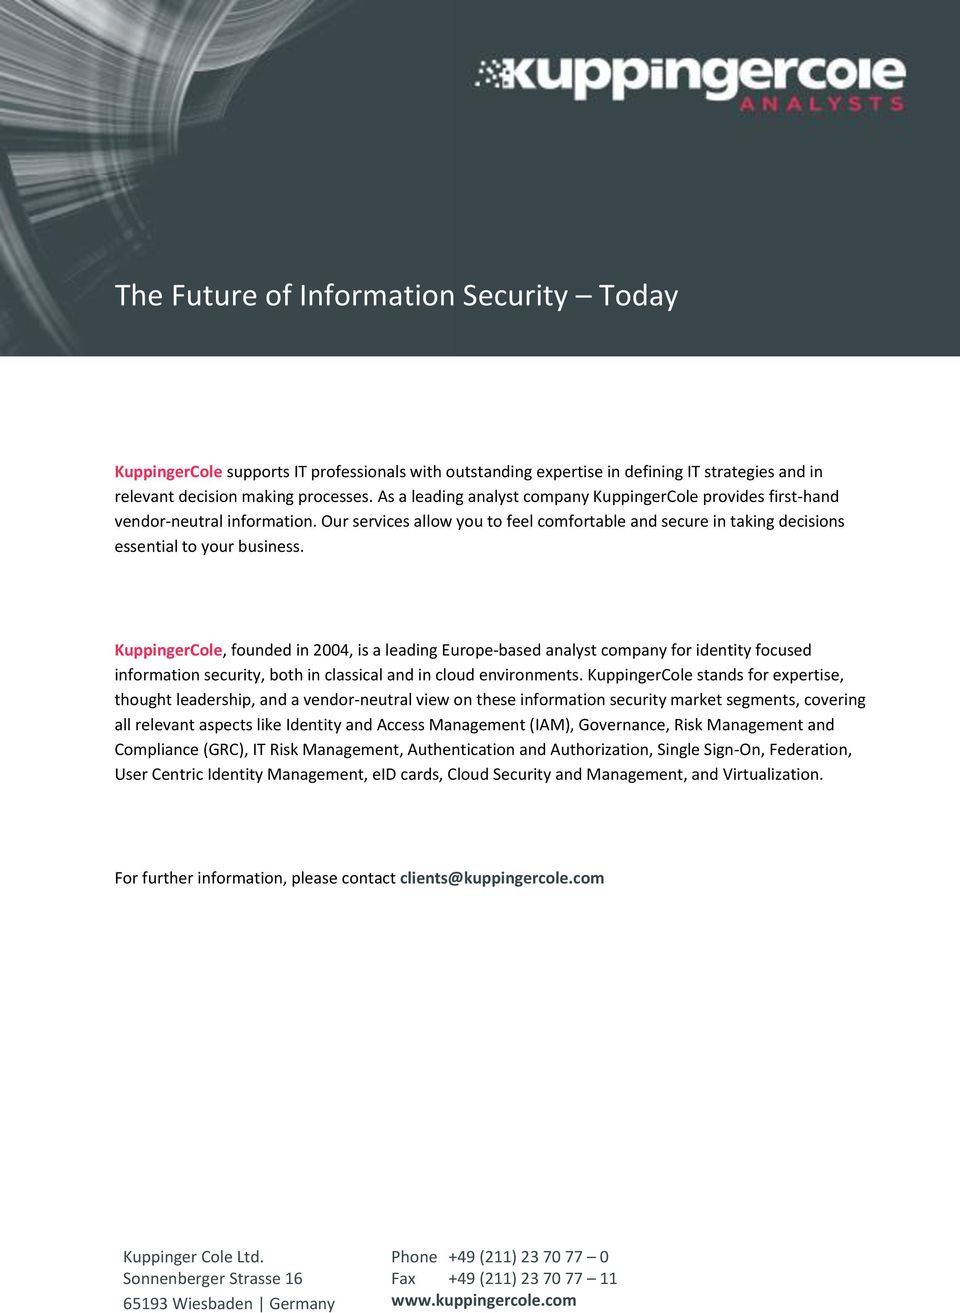 KuppingerCole, founded in 2004, is a leading Europe-based analyst company for identity focused information security, both in classical and in cloud environments.